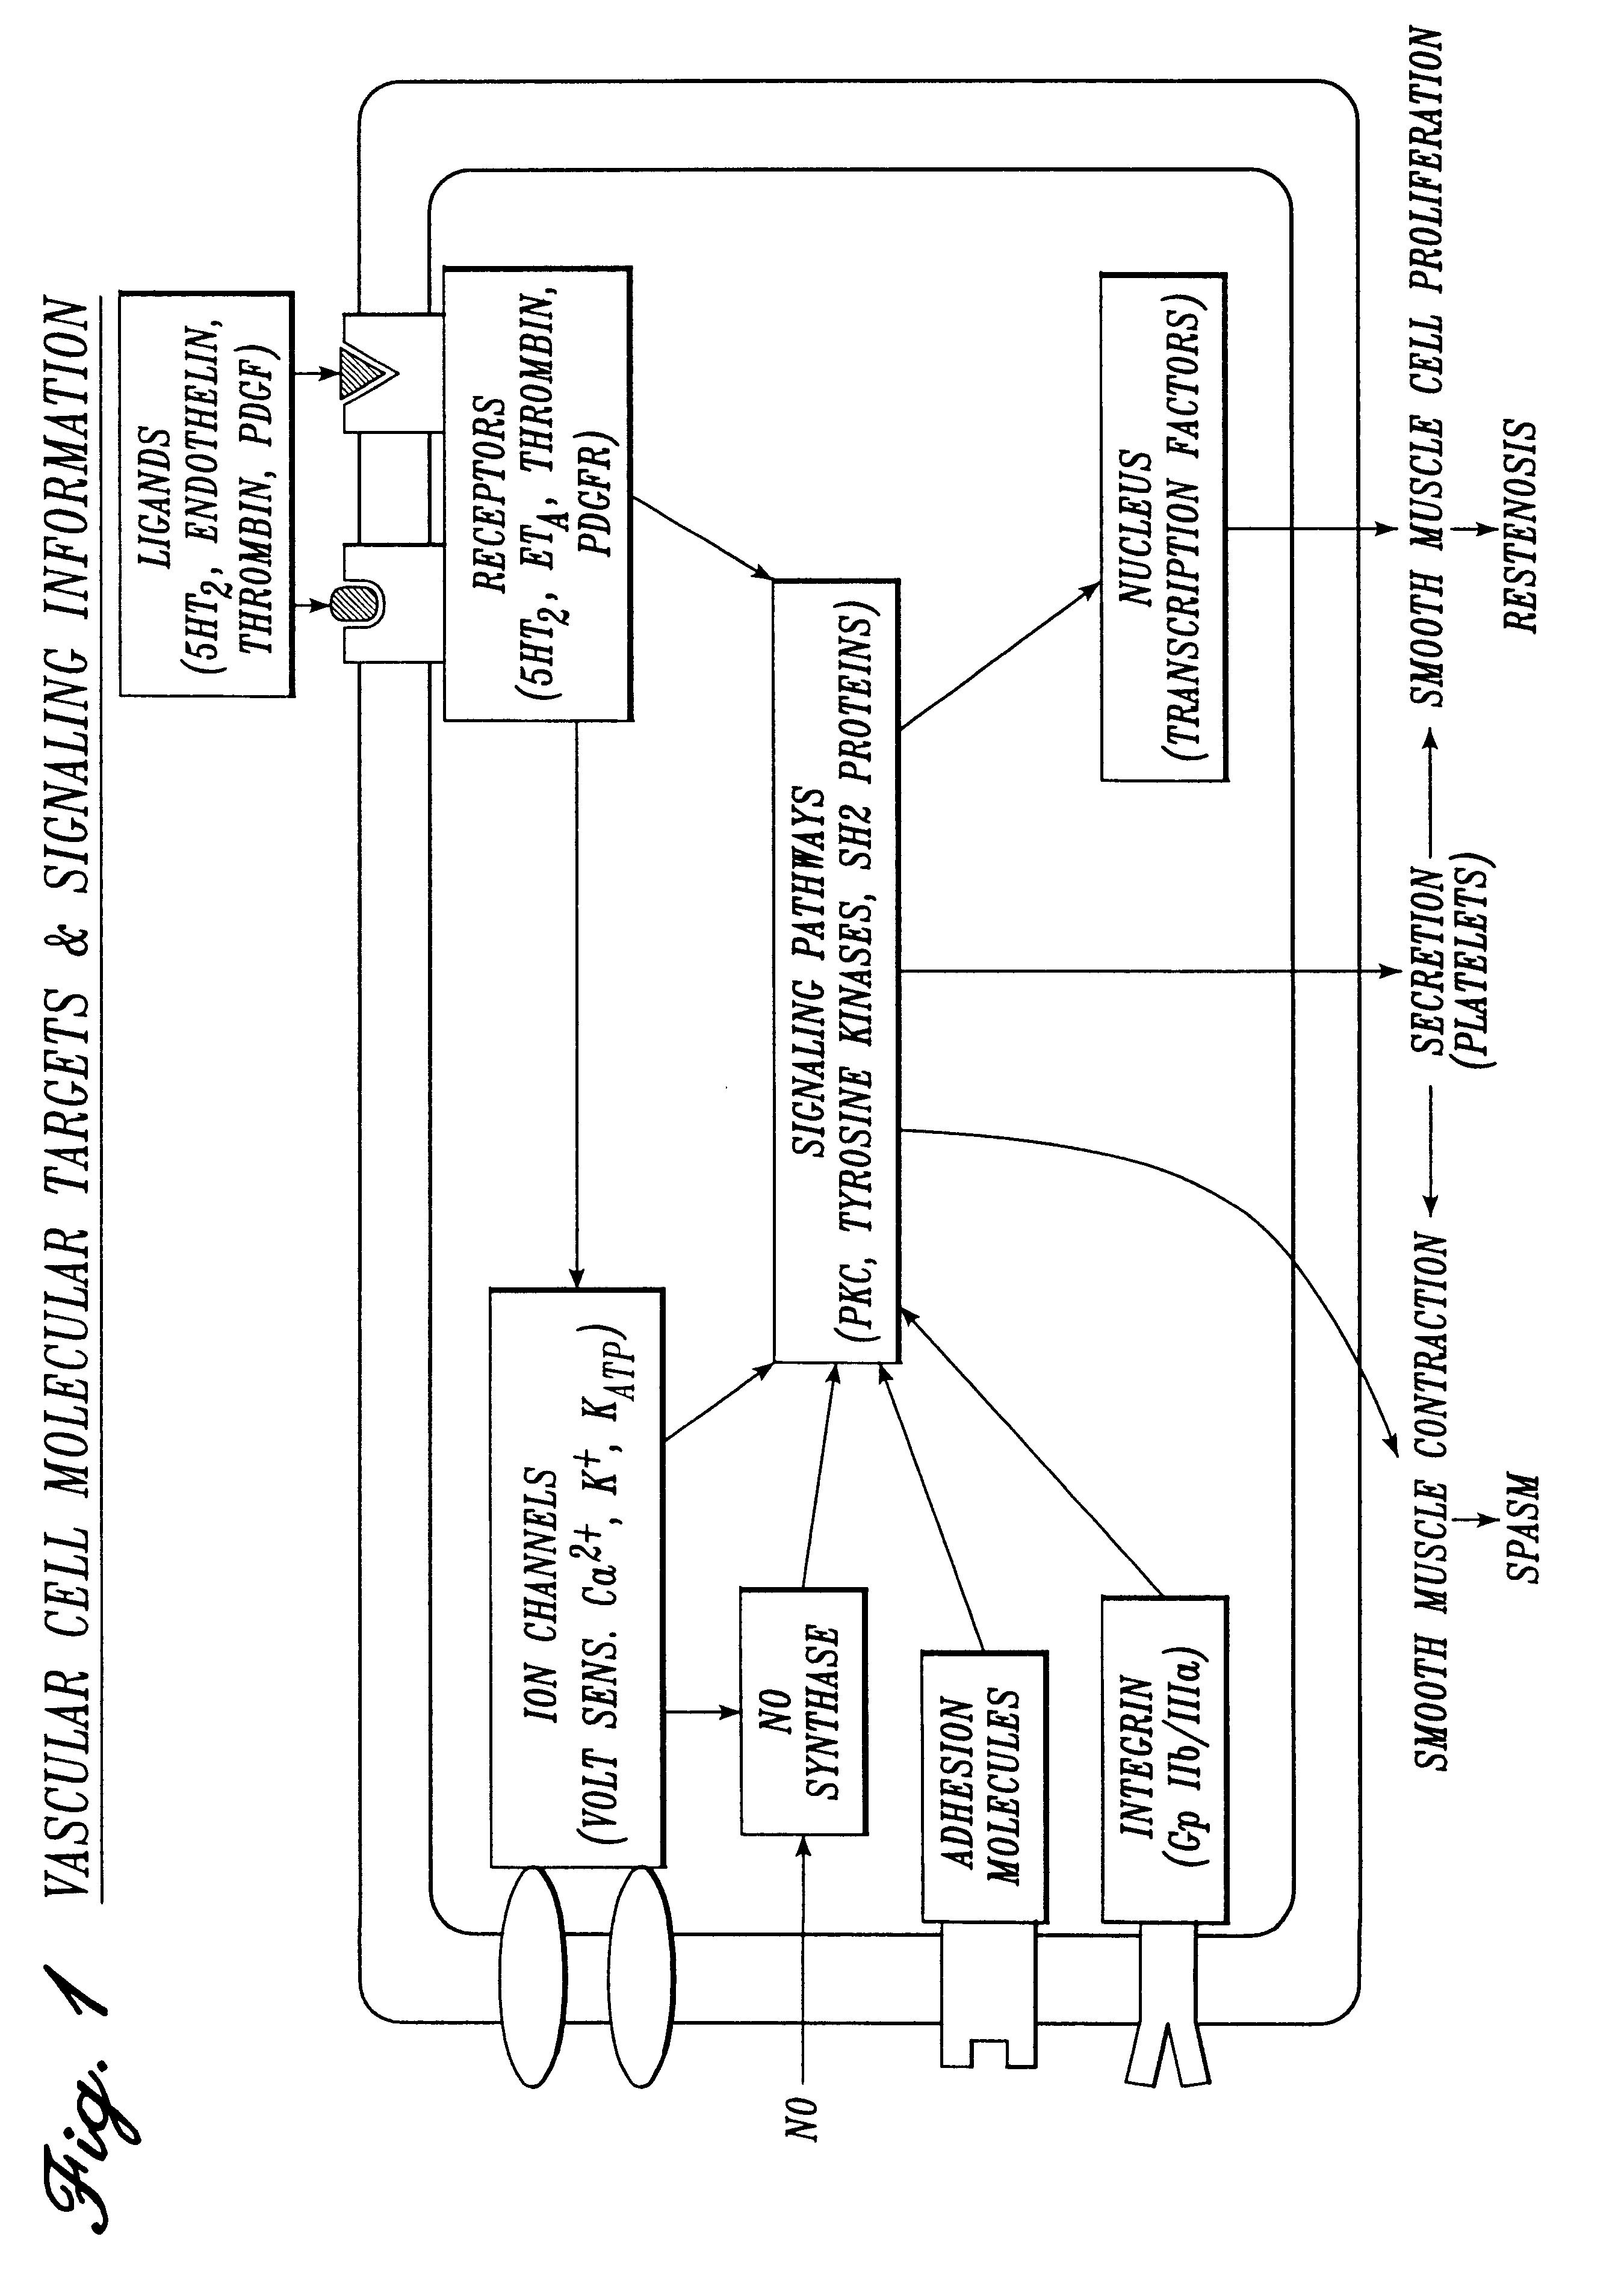 Irrigation solution and methods for inhibition of tumor cell adhesion, pain and inflammation